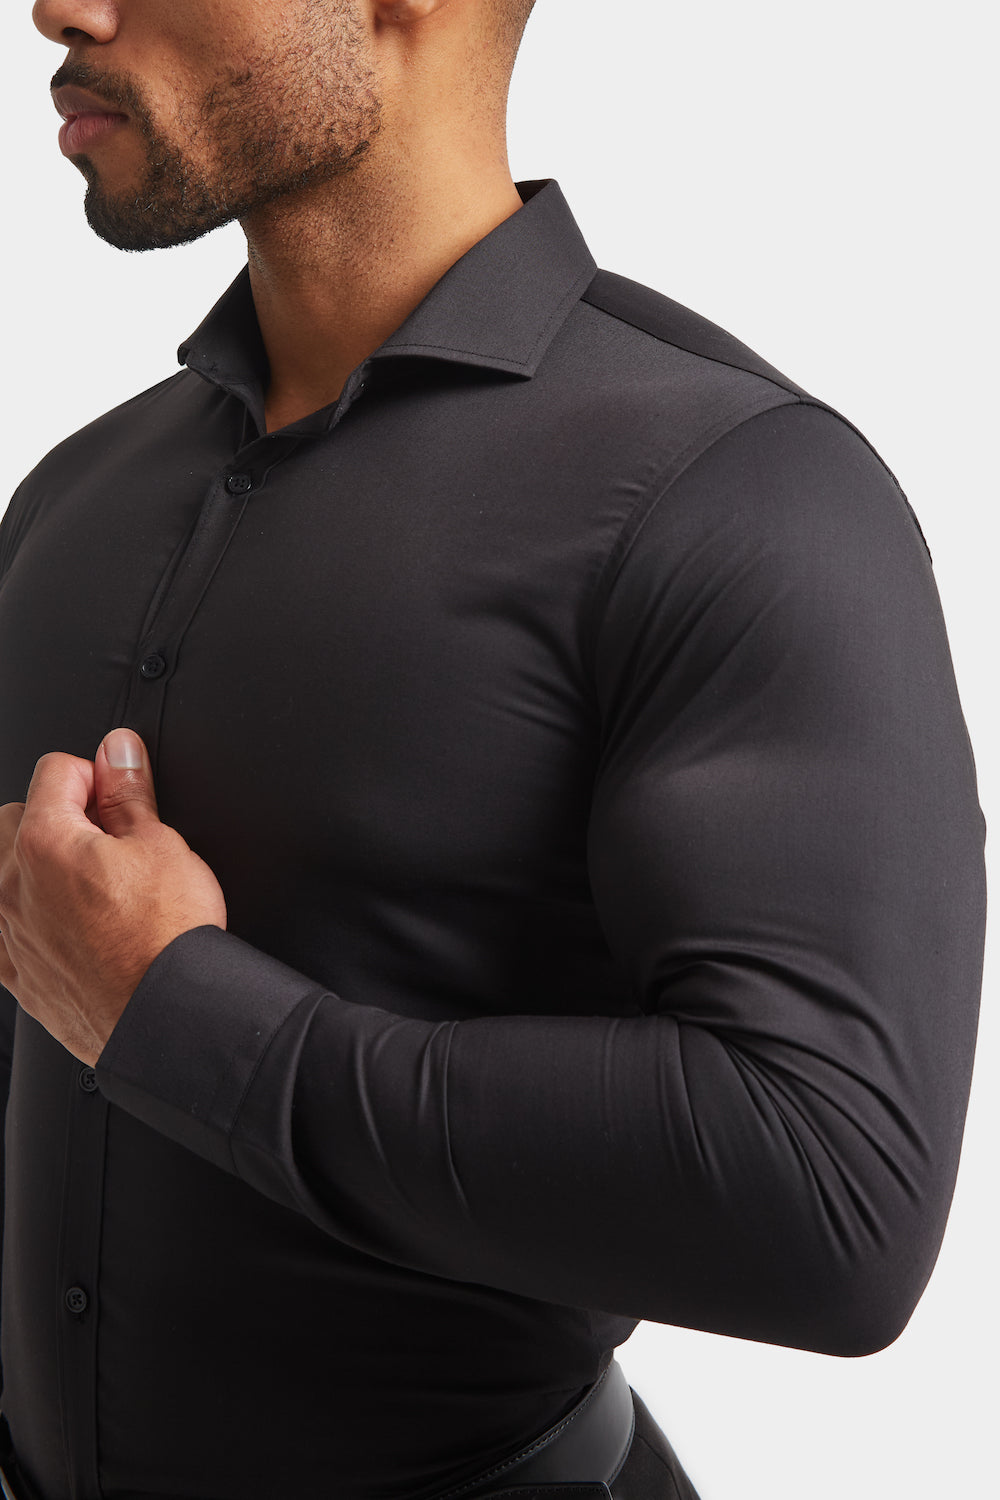 Athletic Fit V-Neck in Black - TAILORED ATHLETE - USA